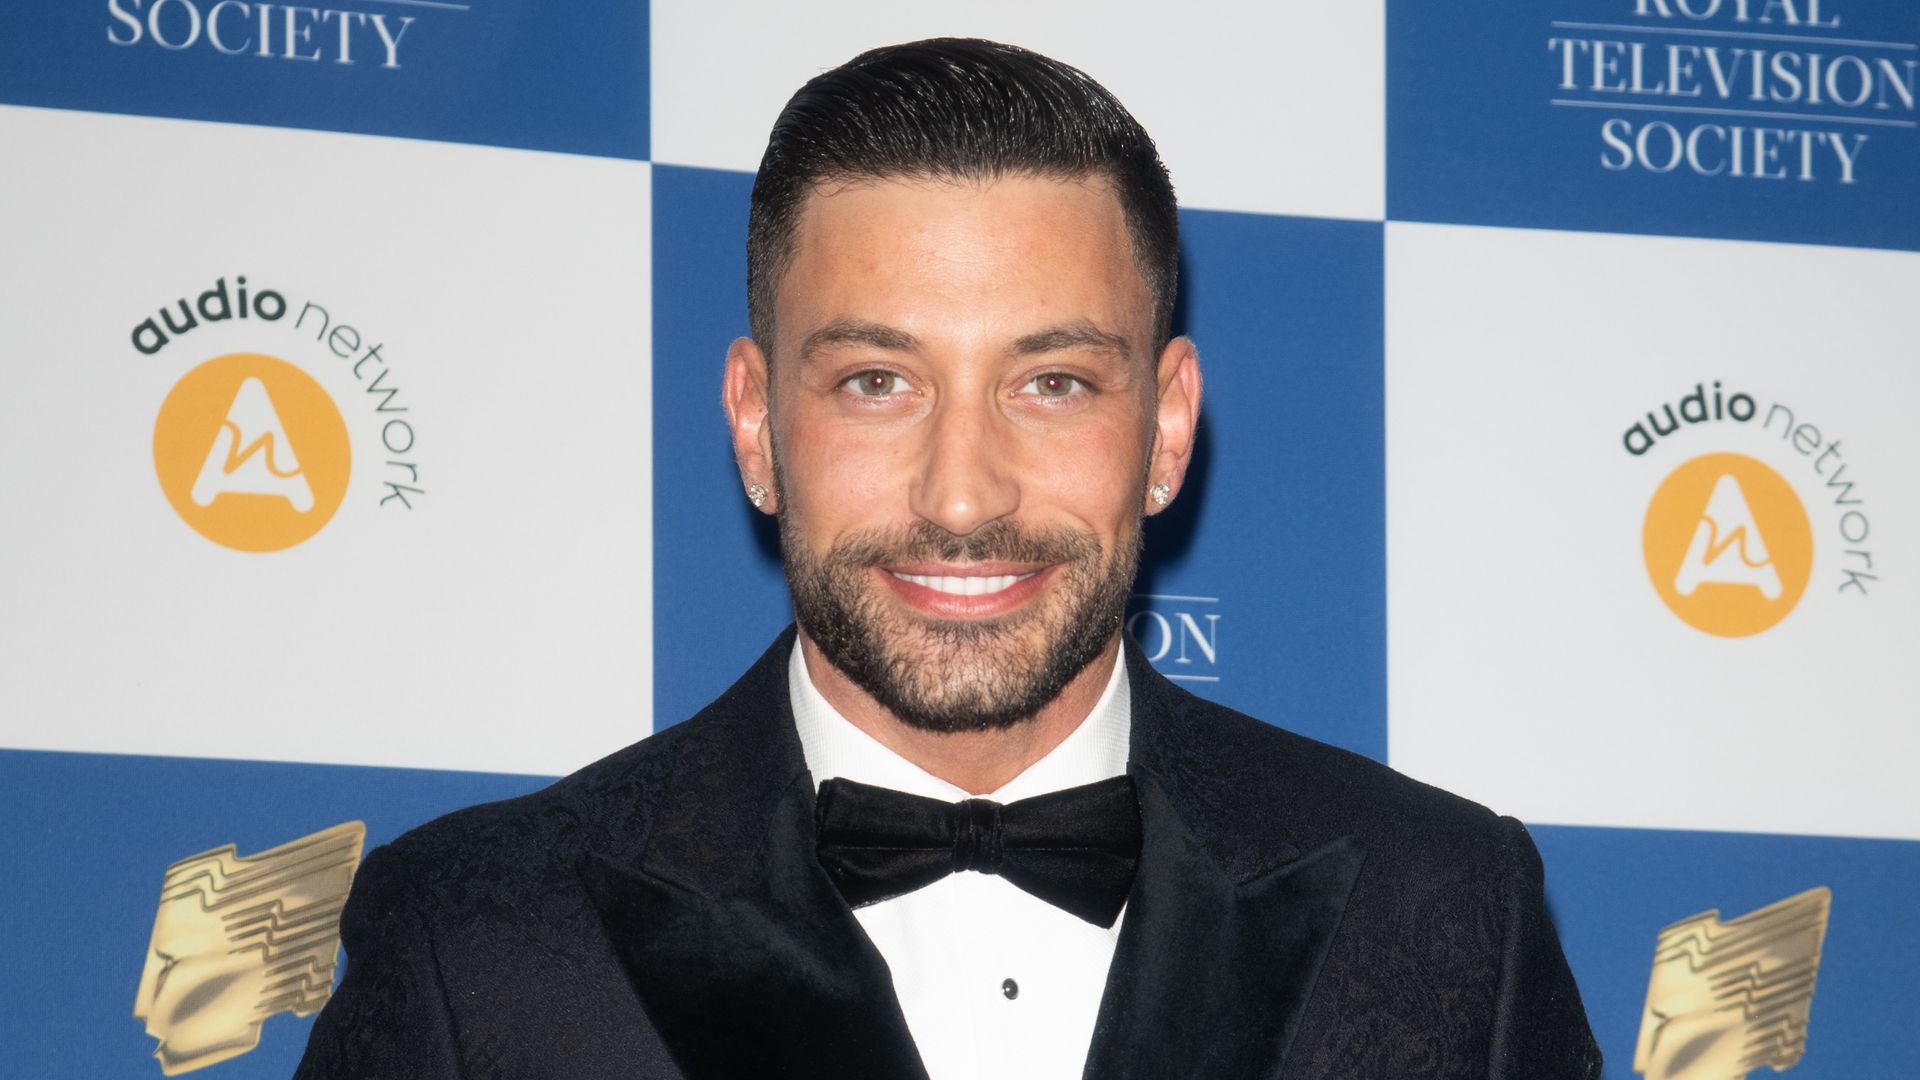 Who is Strictly Come Dancing's Giovanni Pernice dating? Get all the details on his love life